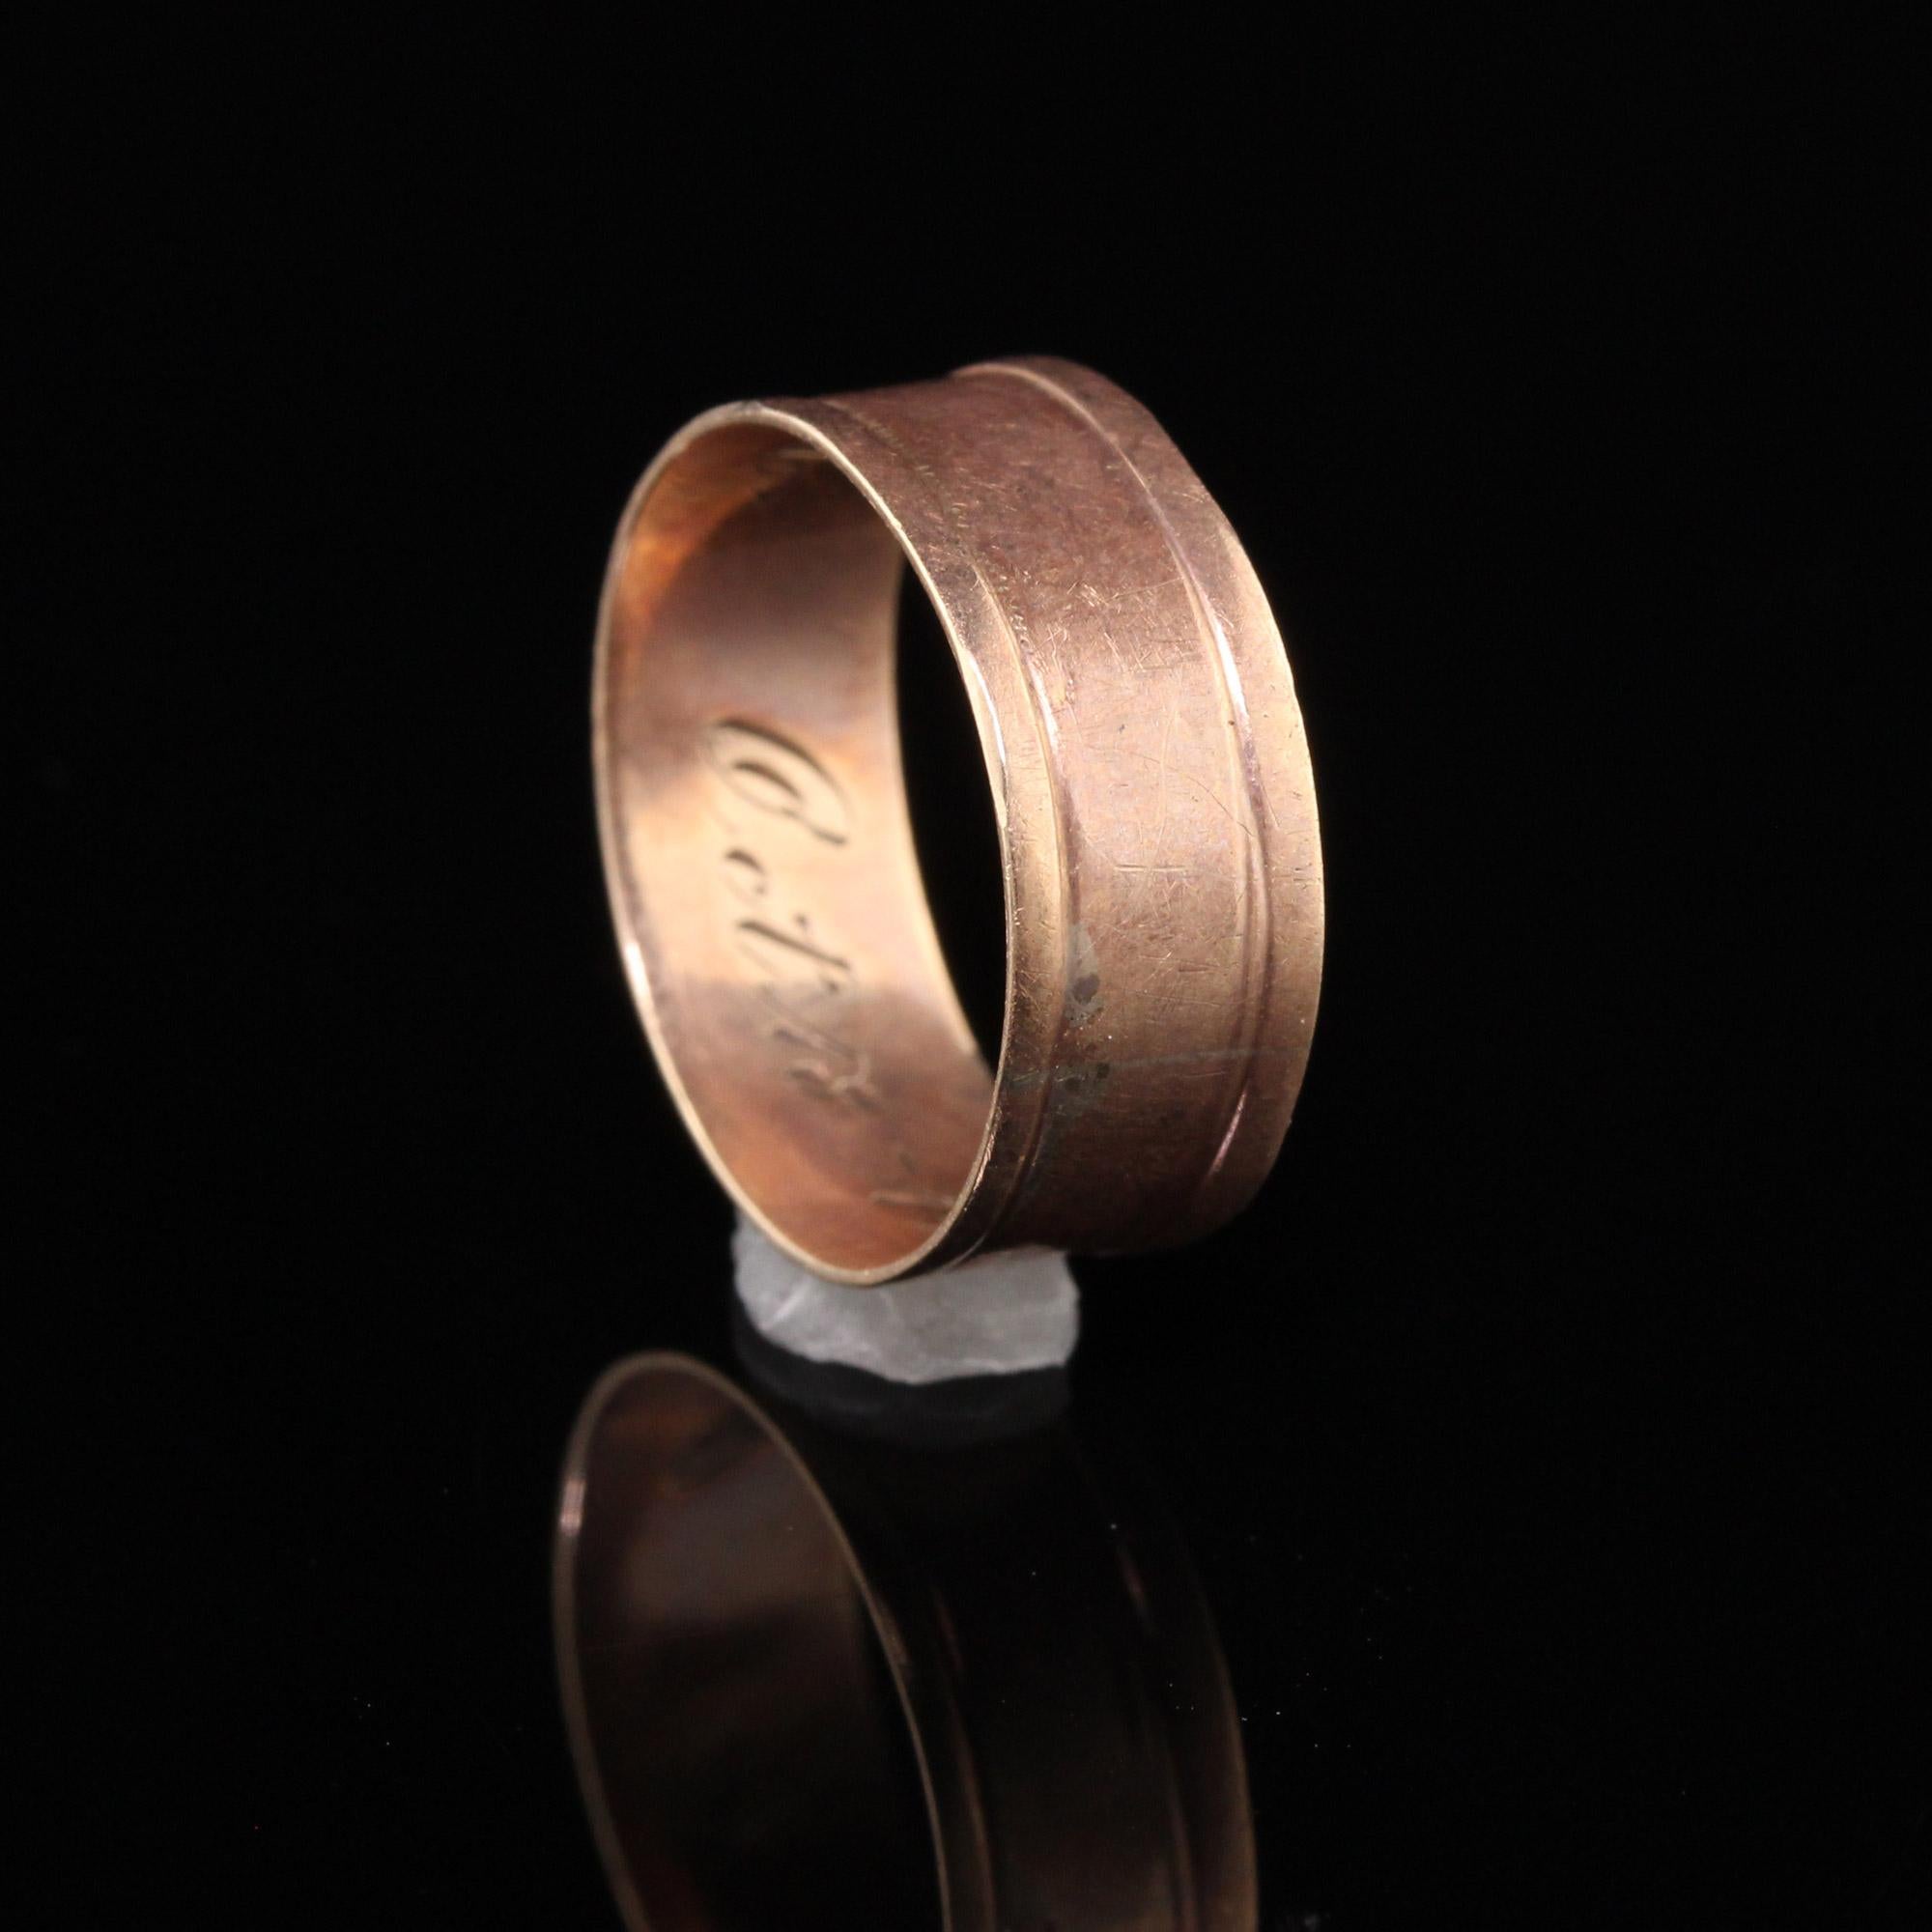 Antique Art Deco 10K Rose Gold Engraved Wedding Band - Size 3 1/4 In Fair Condition For Sale In Great Neck, NY